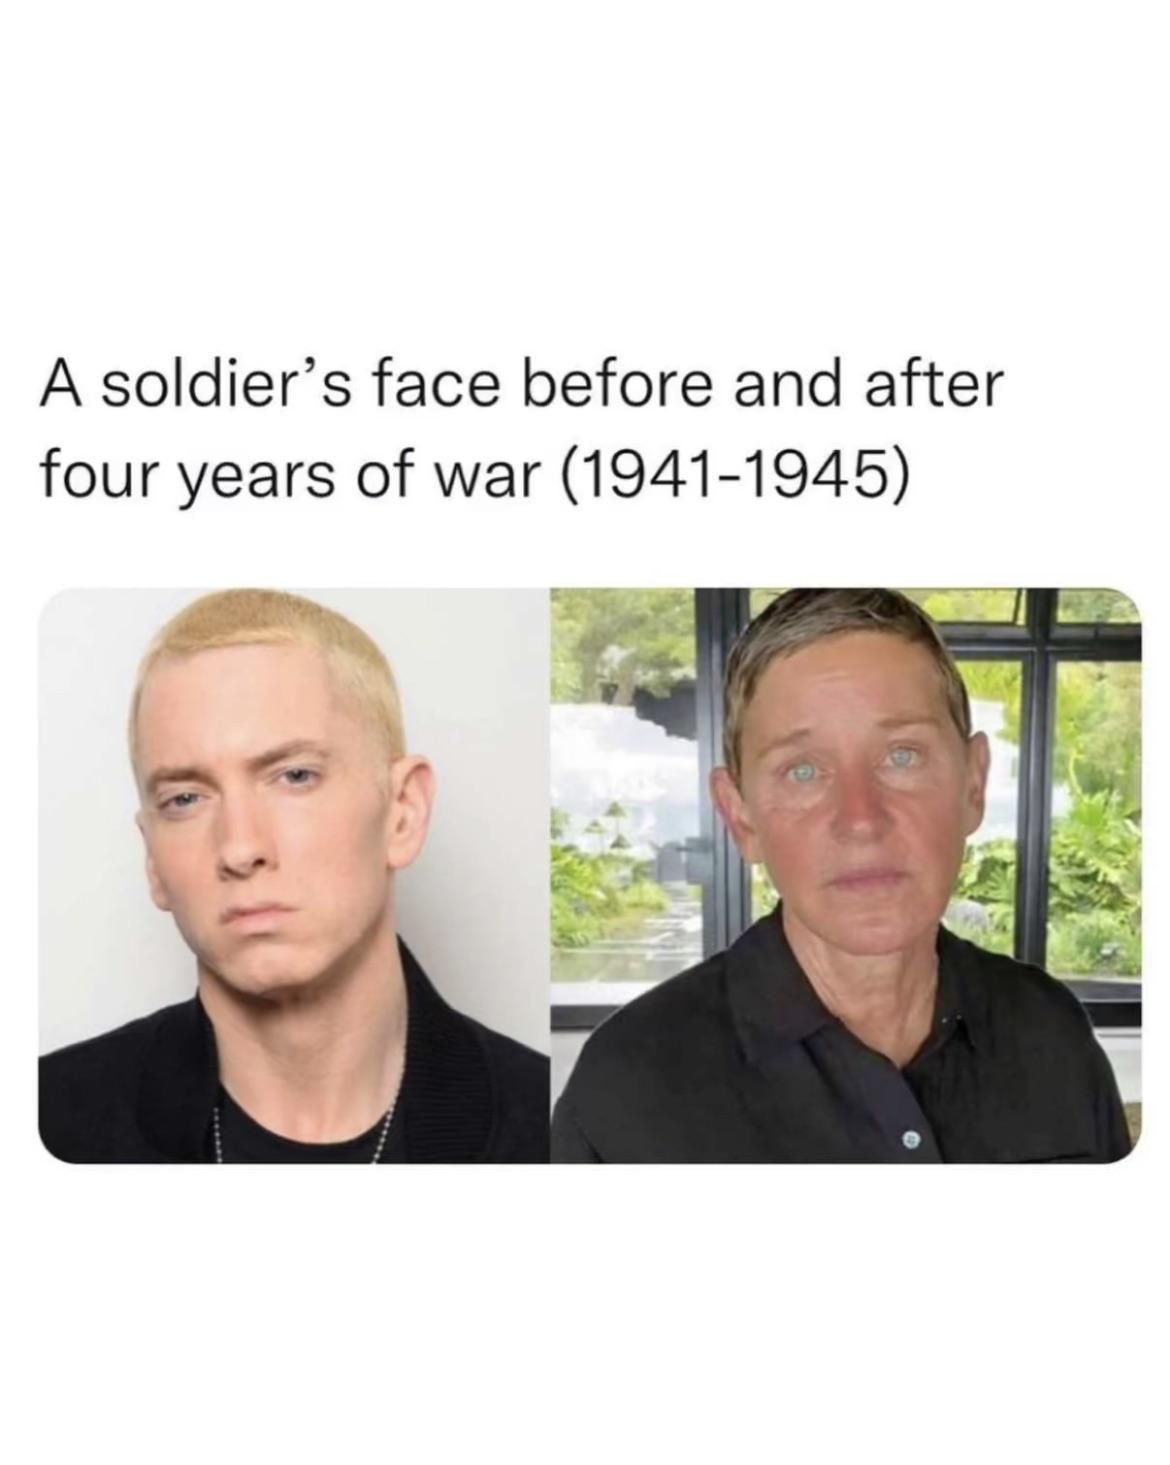 A soldier's face before and after four years of war